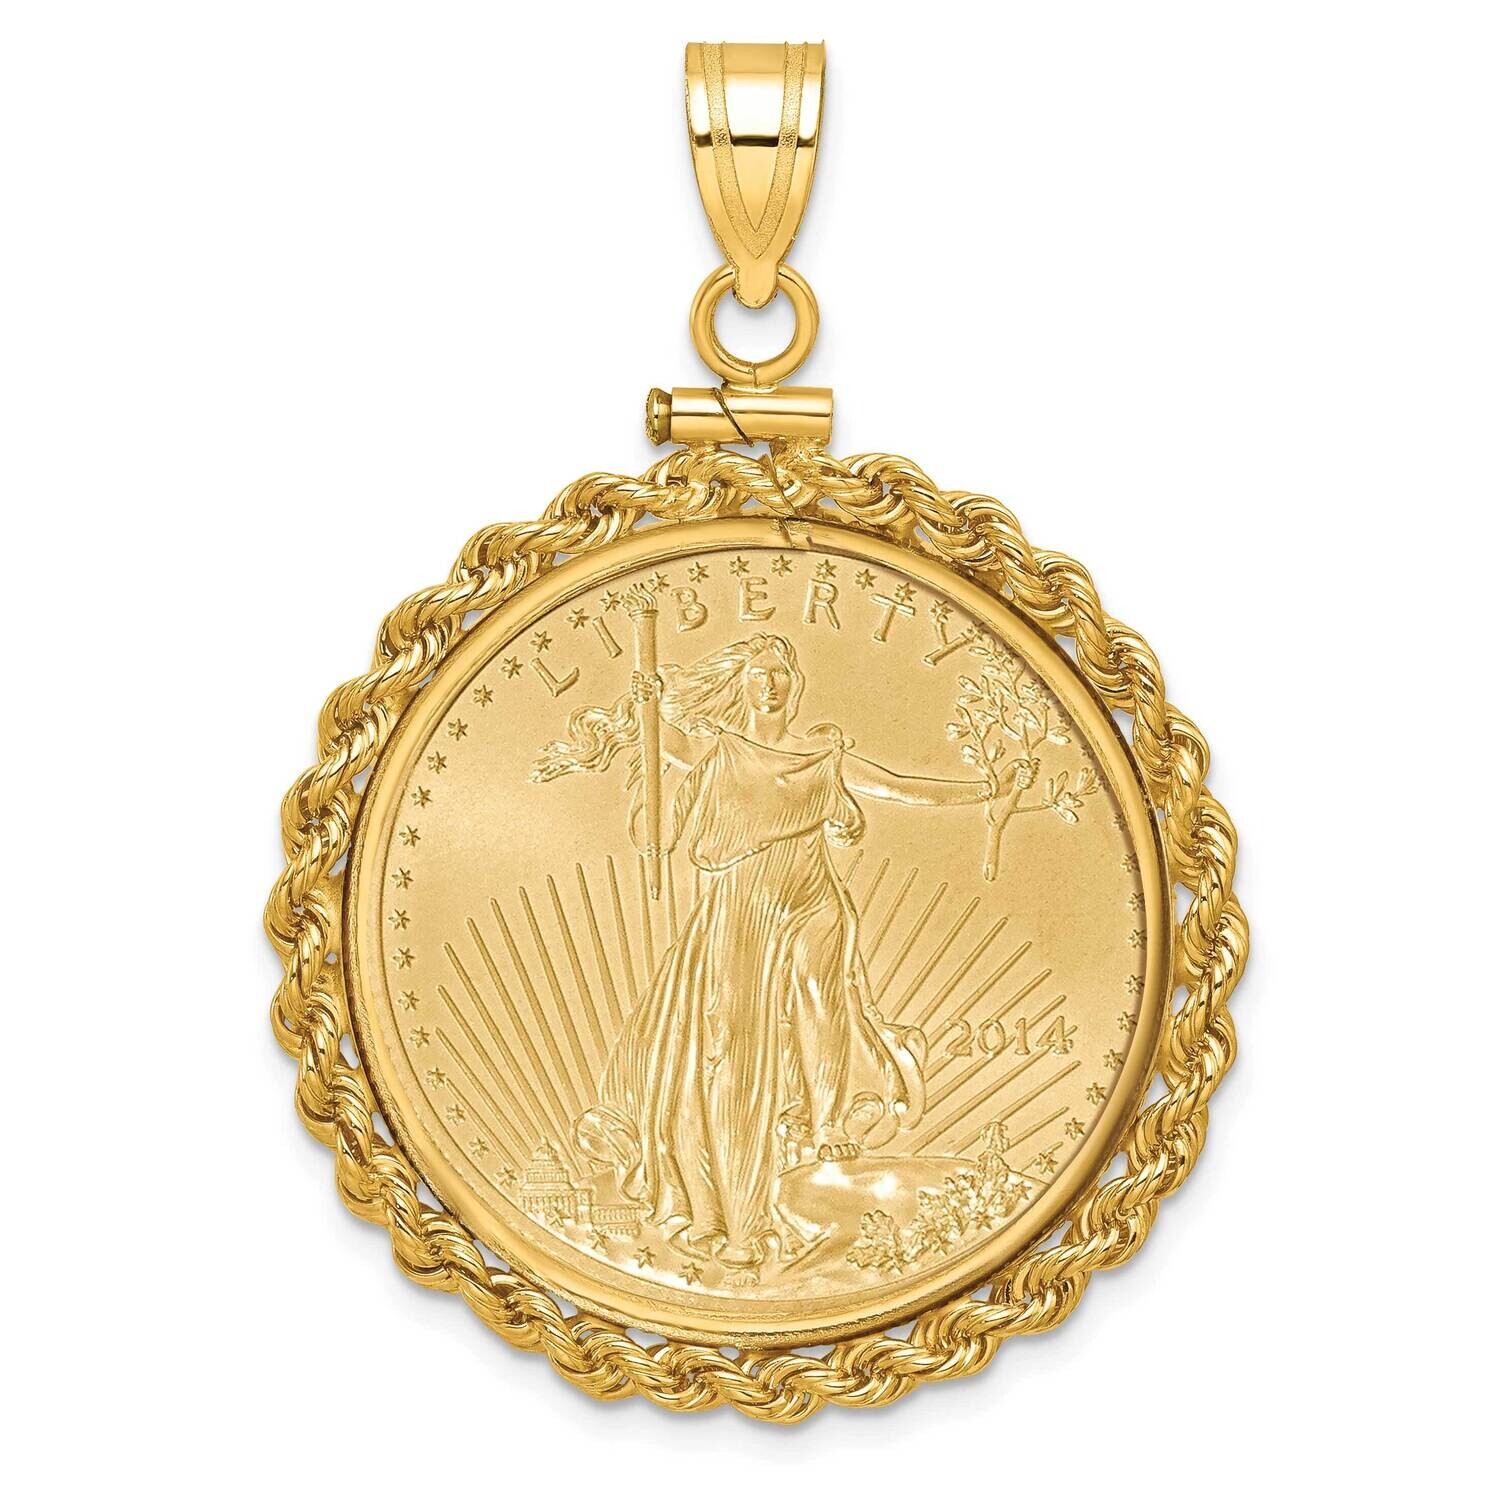 WidebDistinguished Coin Jewelry Rope Screw Top Mounted 1/2Oz American Eagle Coin Bezel Pendant 14k Gold C1215/27.0C